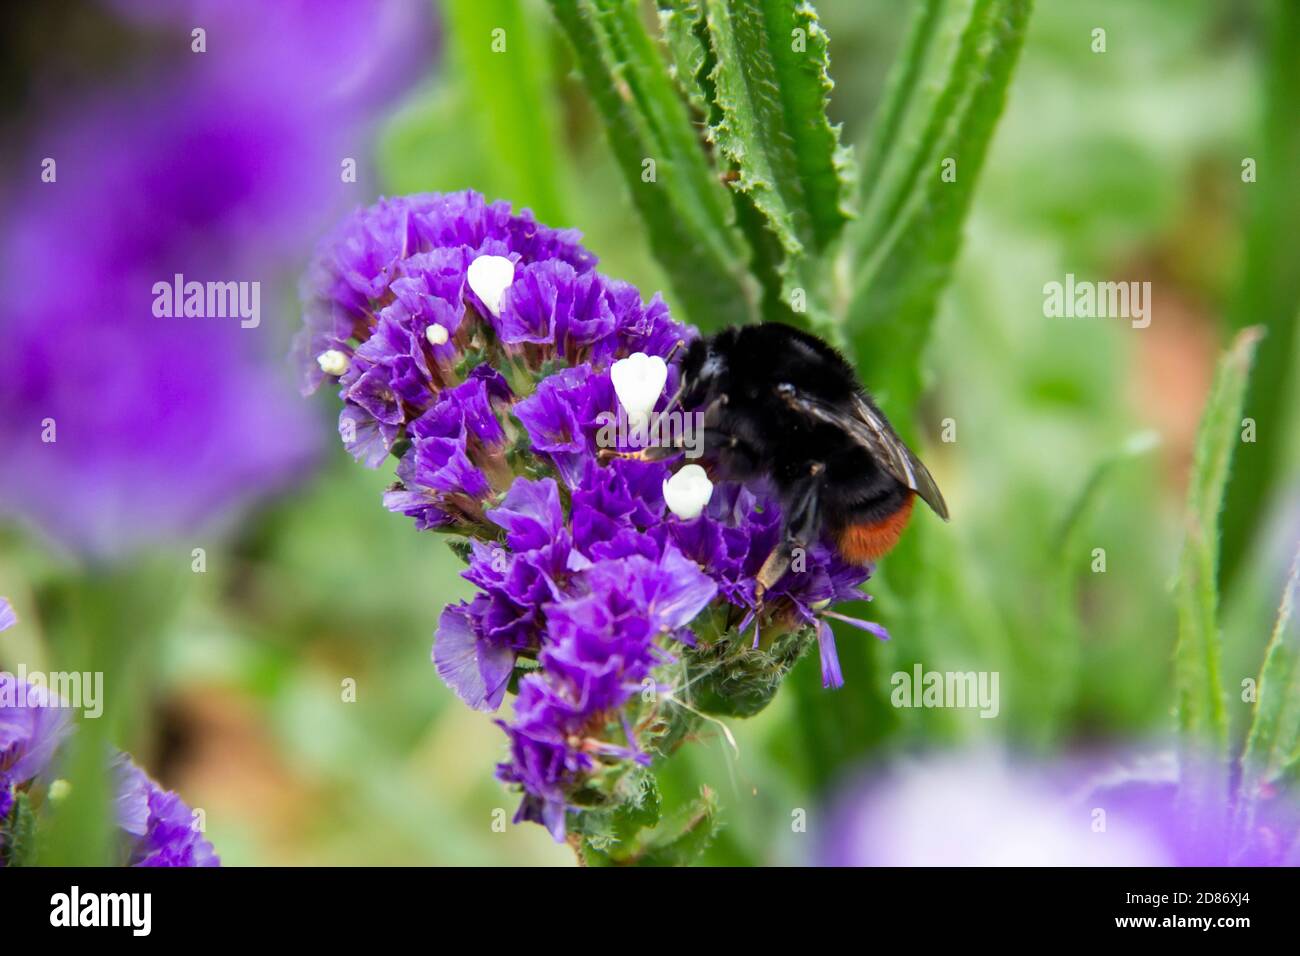 Beautiful flowers of Statice or Limonium sinuatum or Wavyleaf sea lavender.   Small flowers with white and violet color with bumblebee on them. Stock Photo